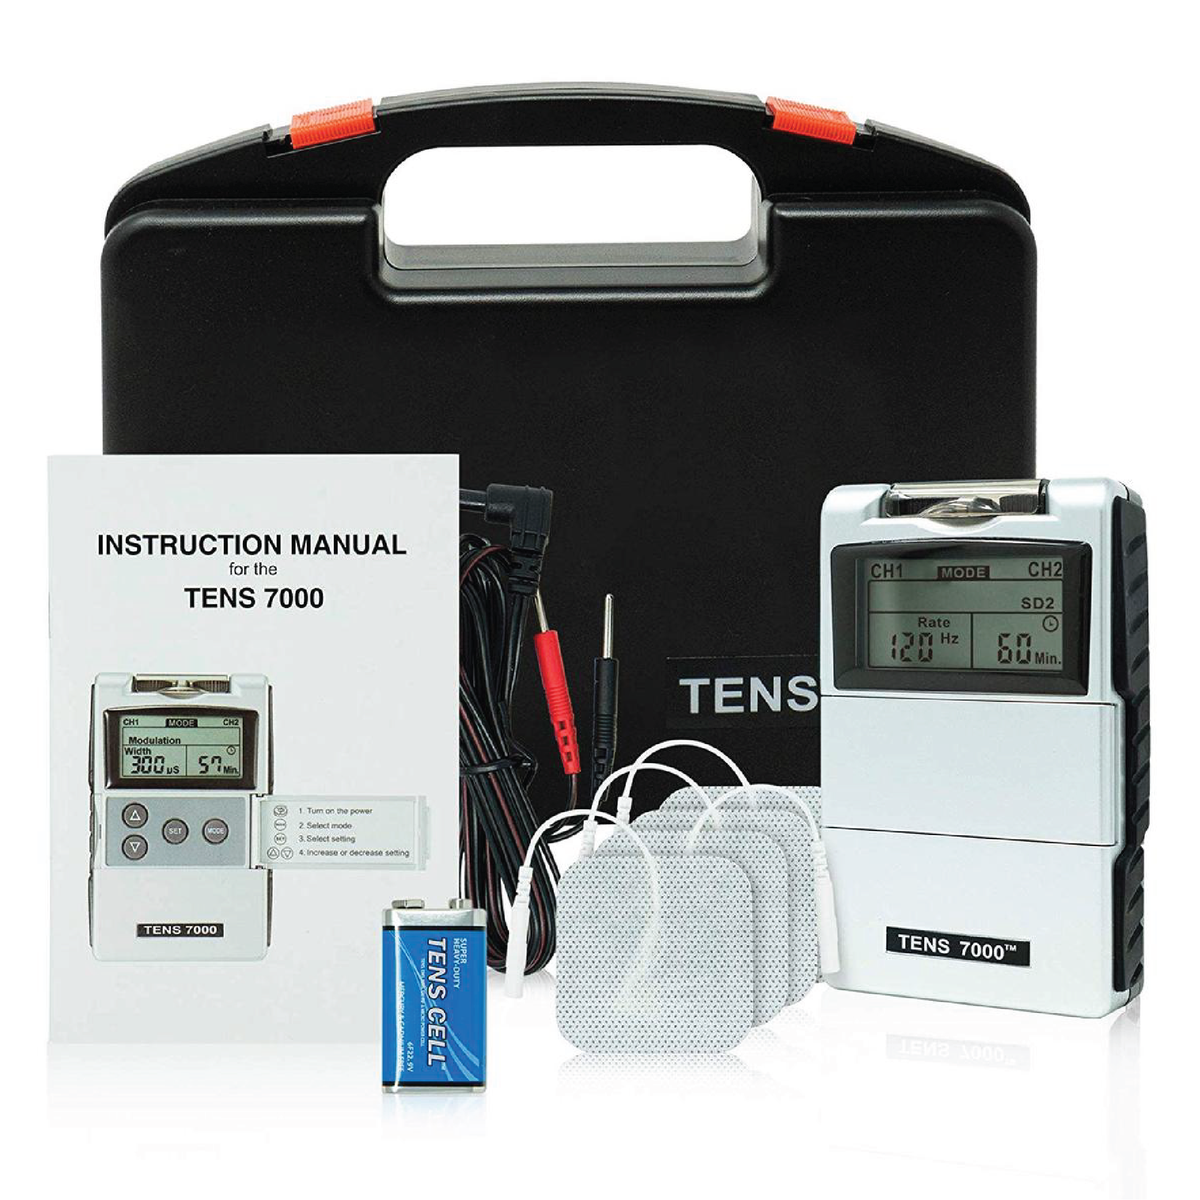 A TENS unit next to its carrying case and accessories